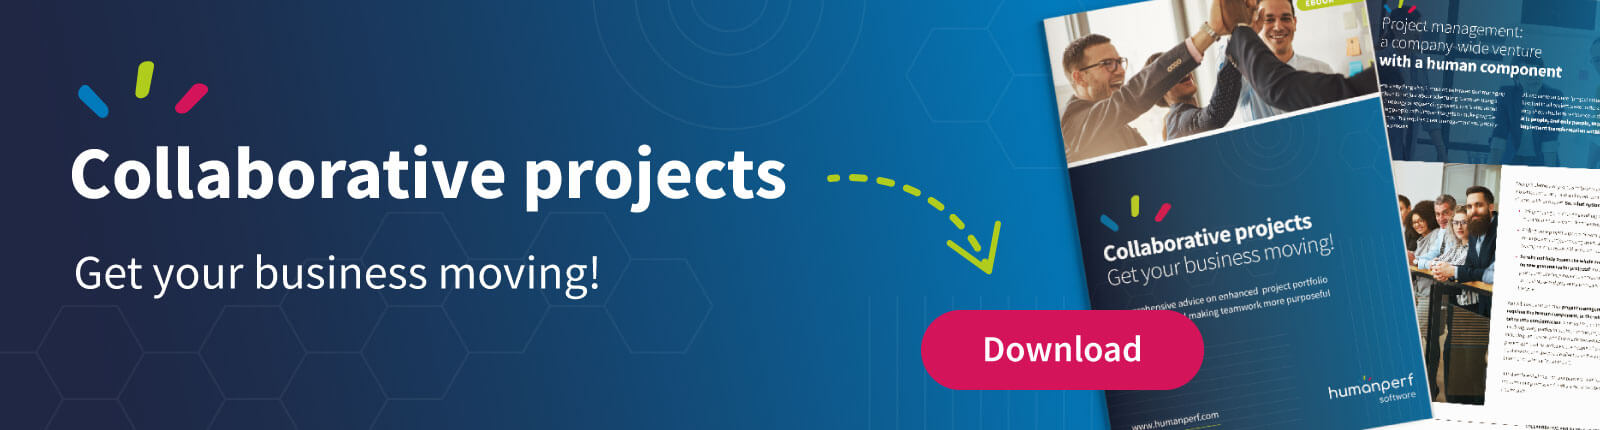 Download our guide for successful collaborative projects